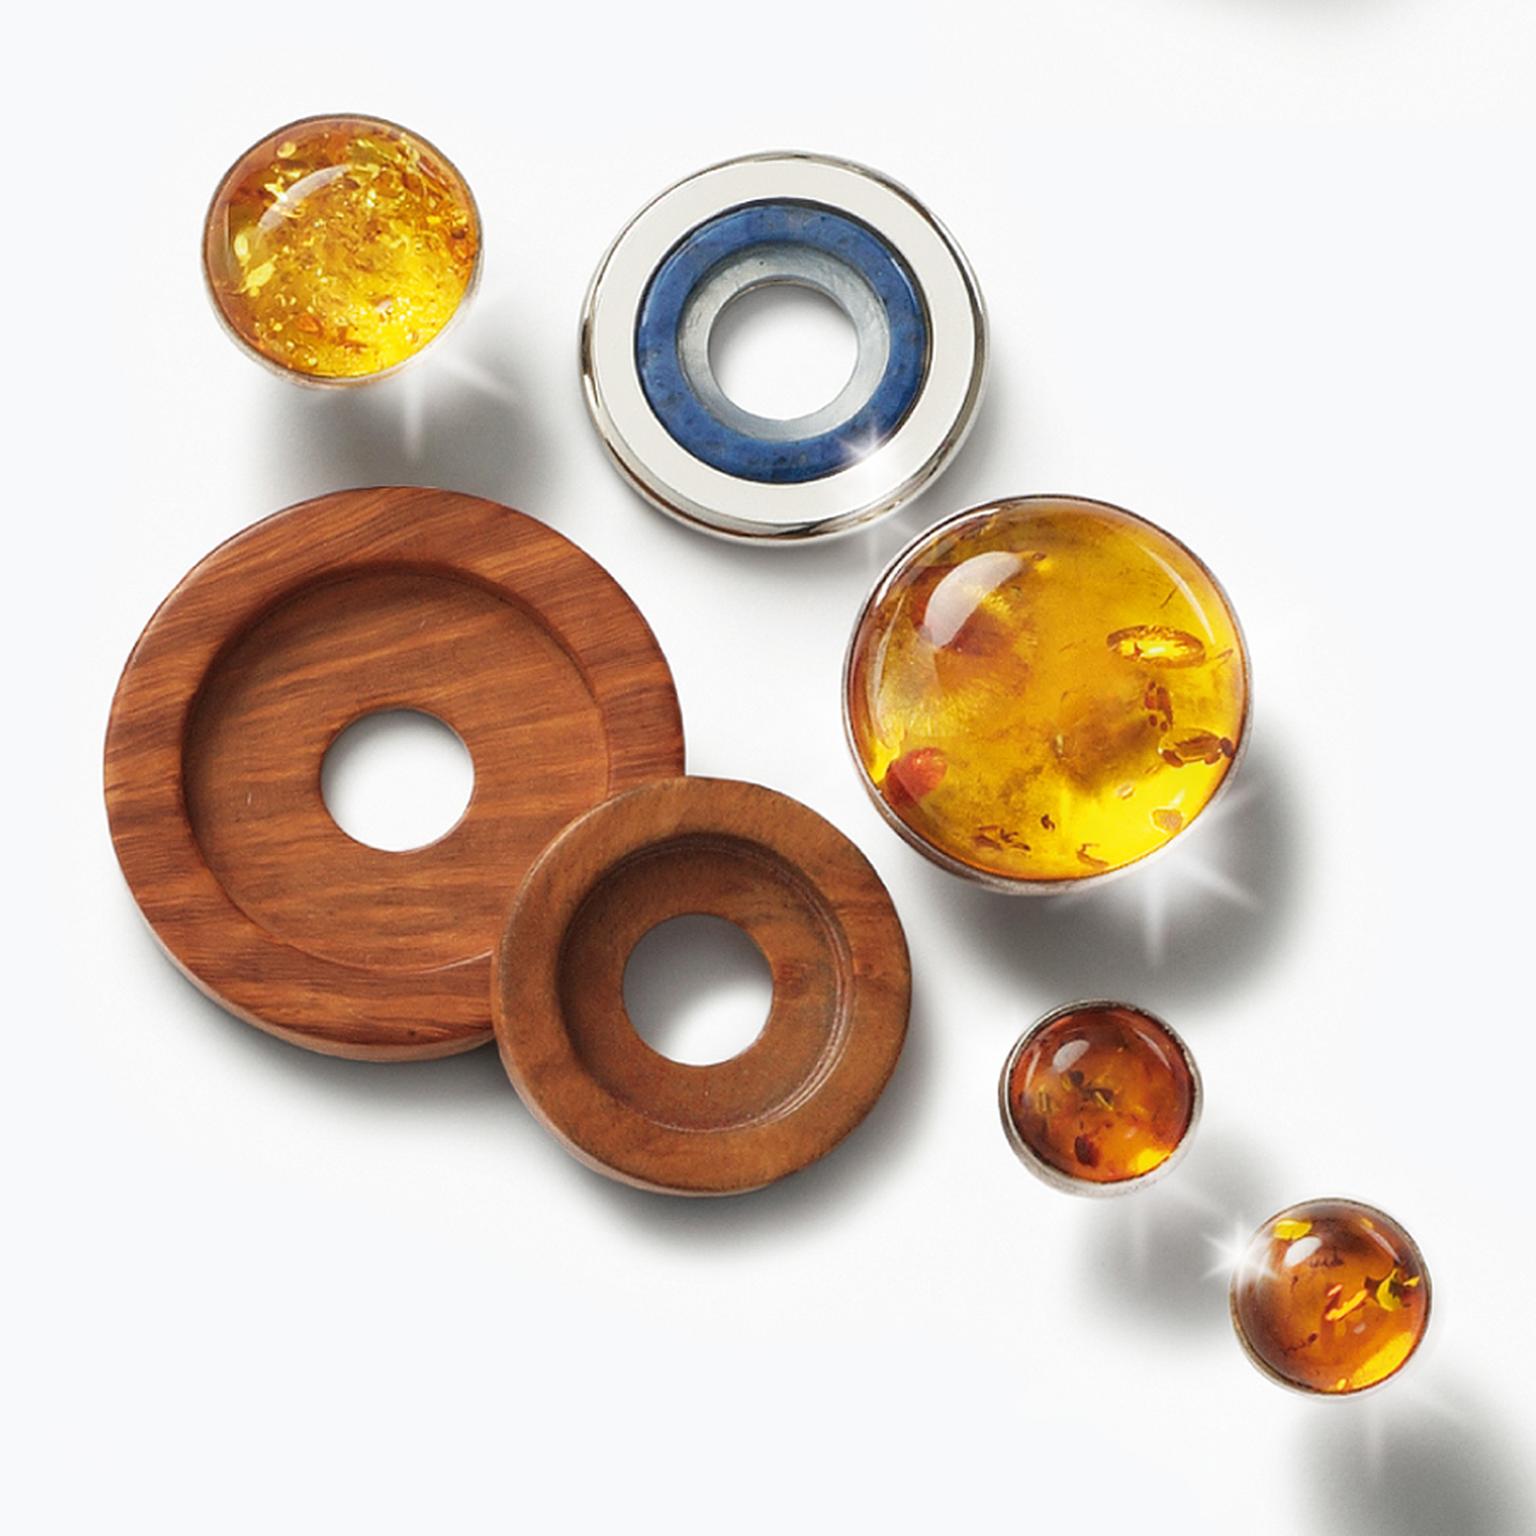 Charlotte Ehinger-Schwarz 1876. Baltic Colours. Earrings, pendants and rings with blue sapphires, fire enamel, stainless steel disc, faceted rock crystal over mother of pearl,  aquamarine, amber, bruyere wood.  All pieces sold separatley. Prices...